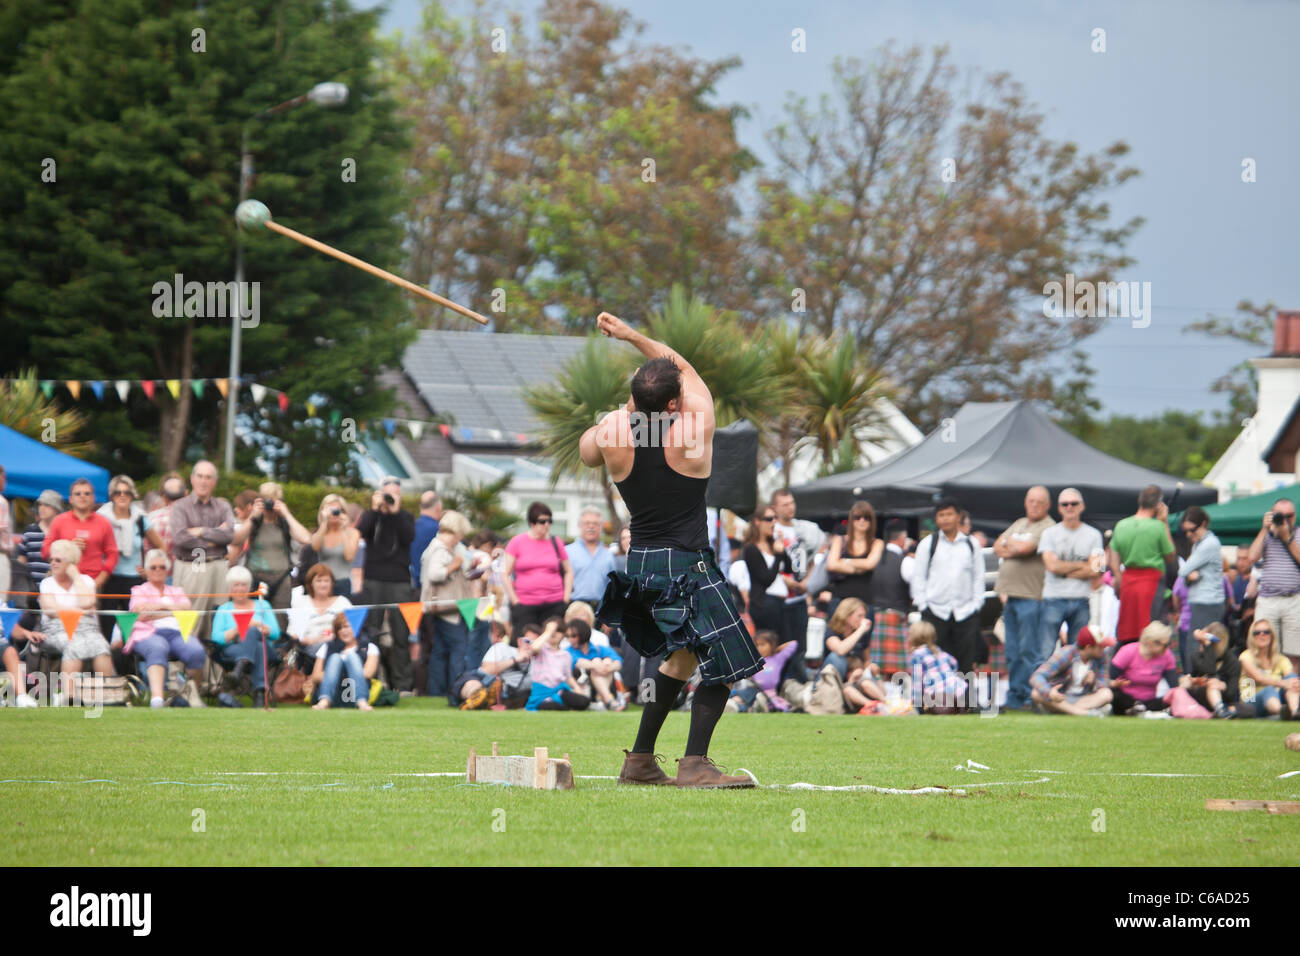 Competitor throwing a Hammer during a competition in the Scottish Standing Style at Brodick Highland Games, Isle of Arran Stock Photo